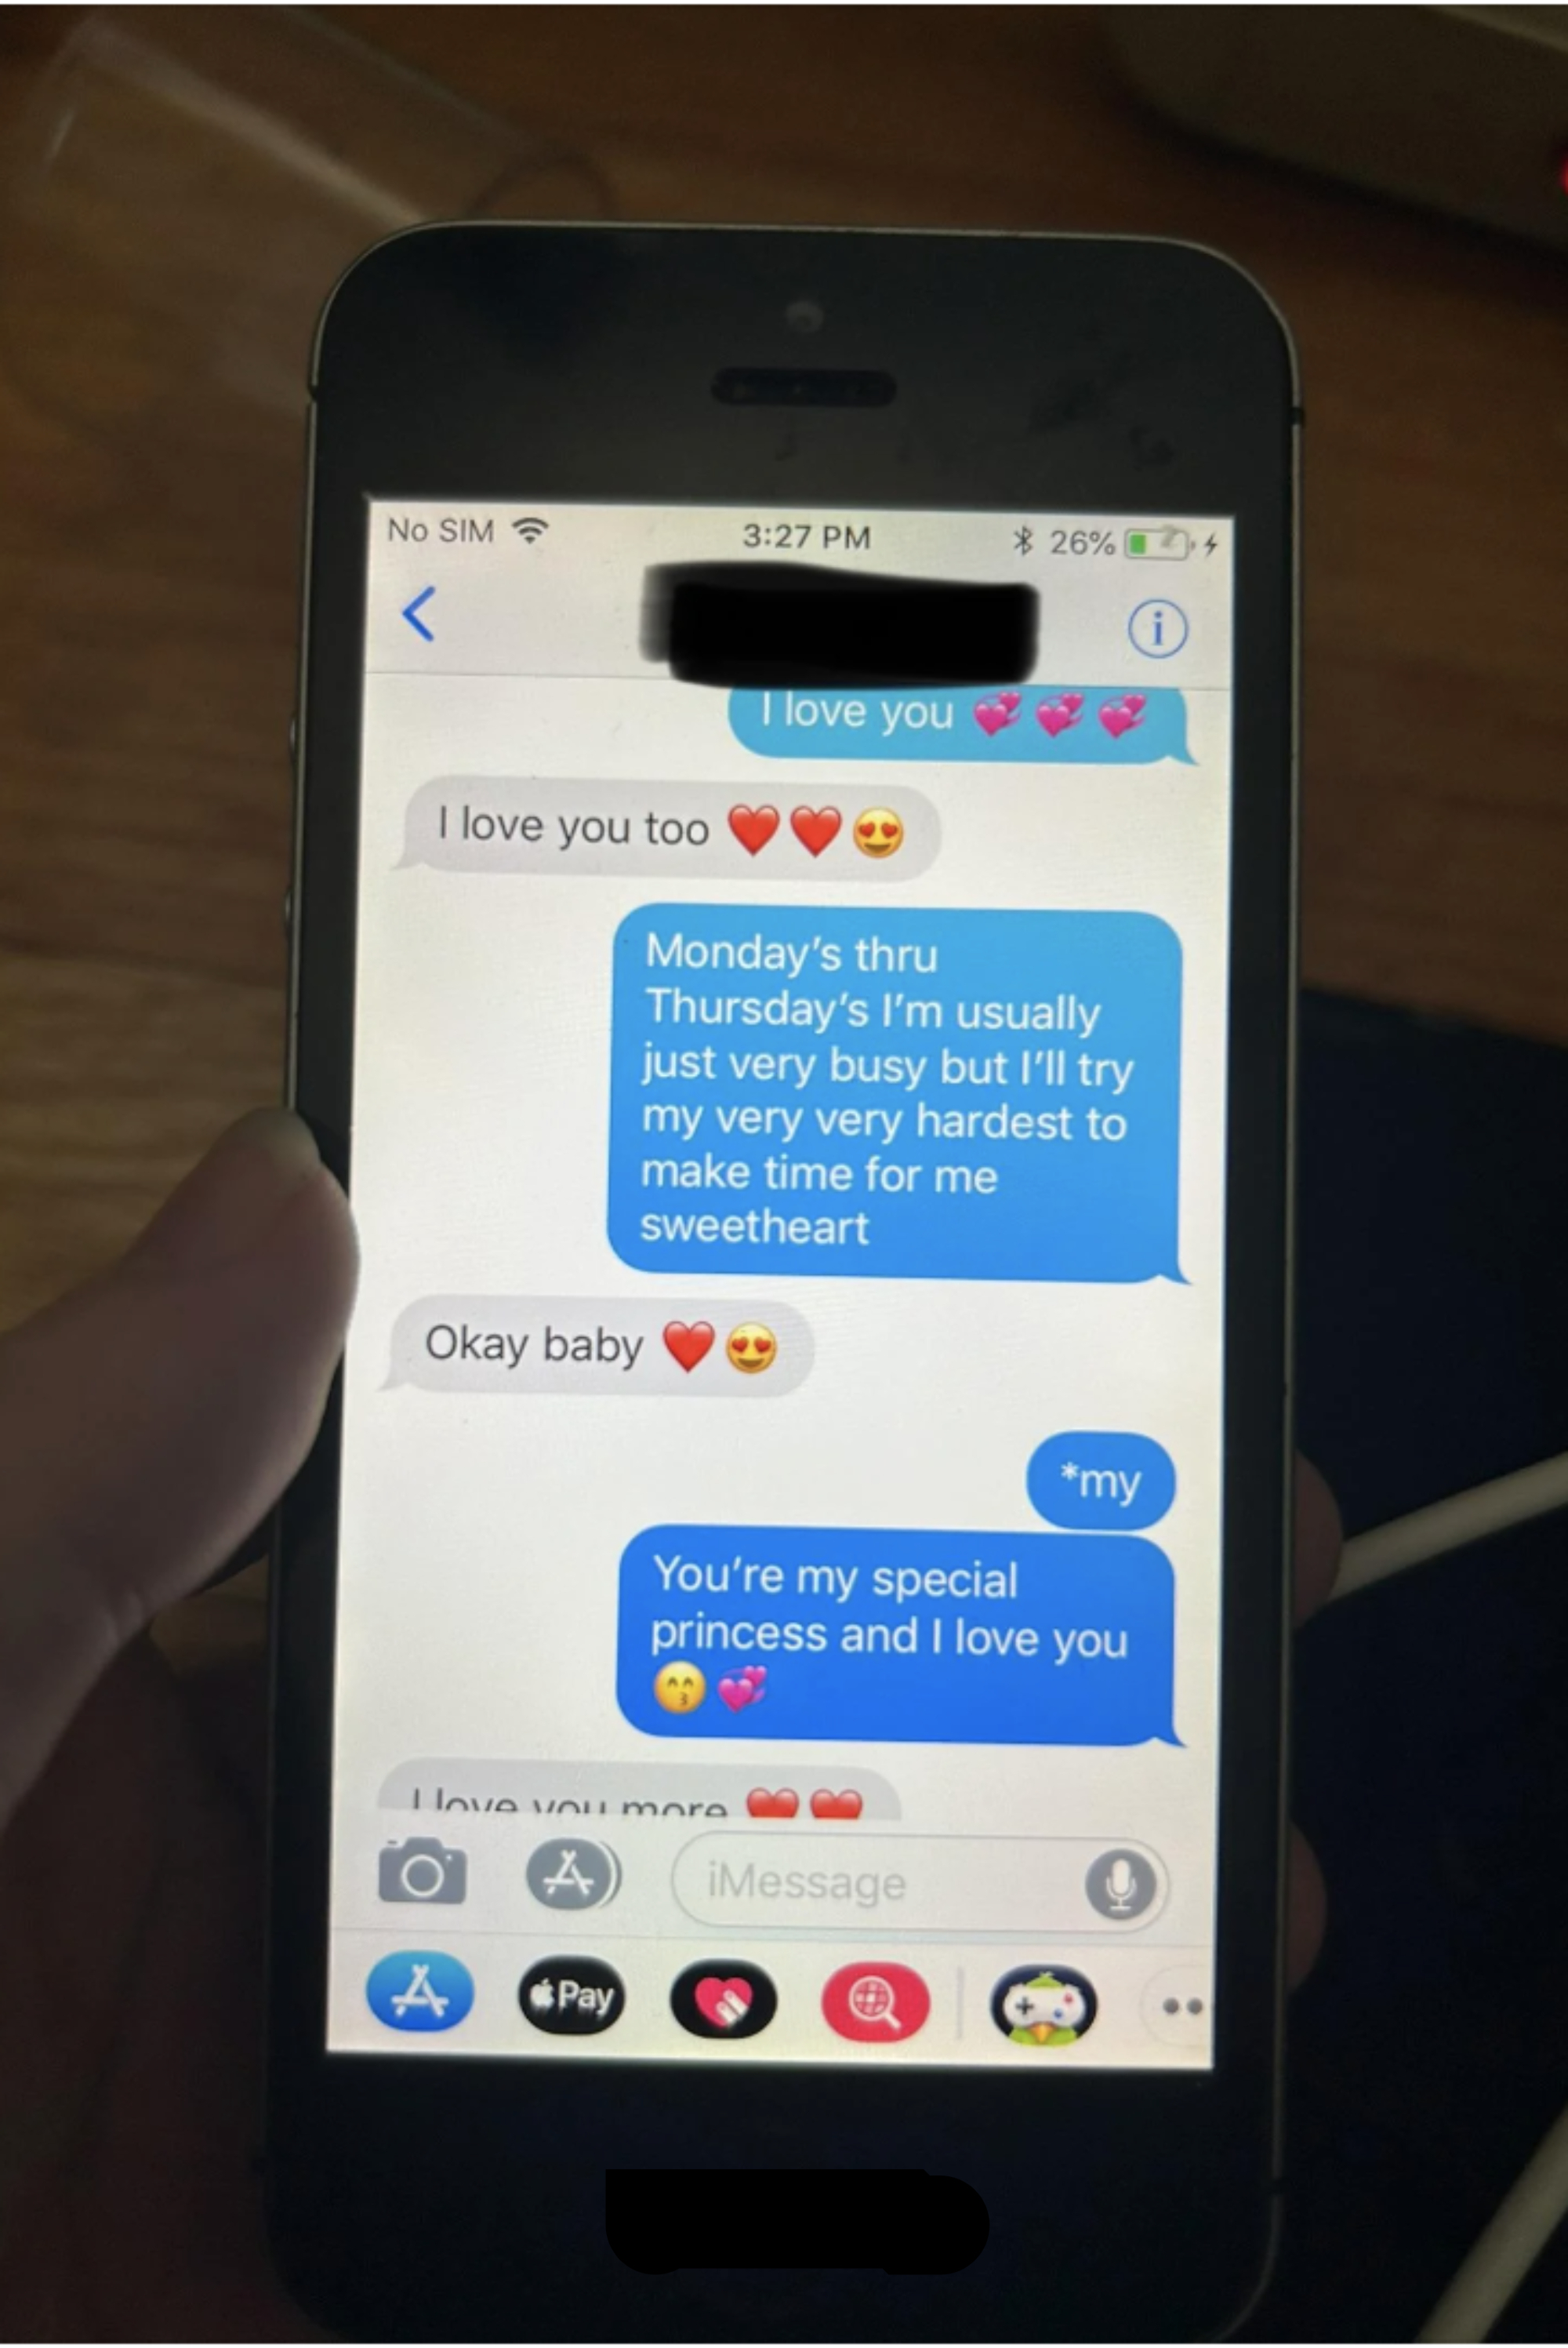 Text exchange: One person expresses love and plans to make time for their partner despite being busy. The responses are affectionate and appreciative